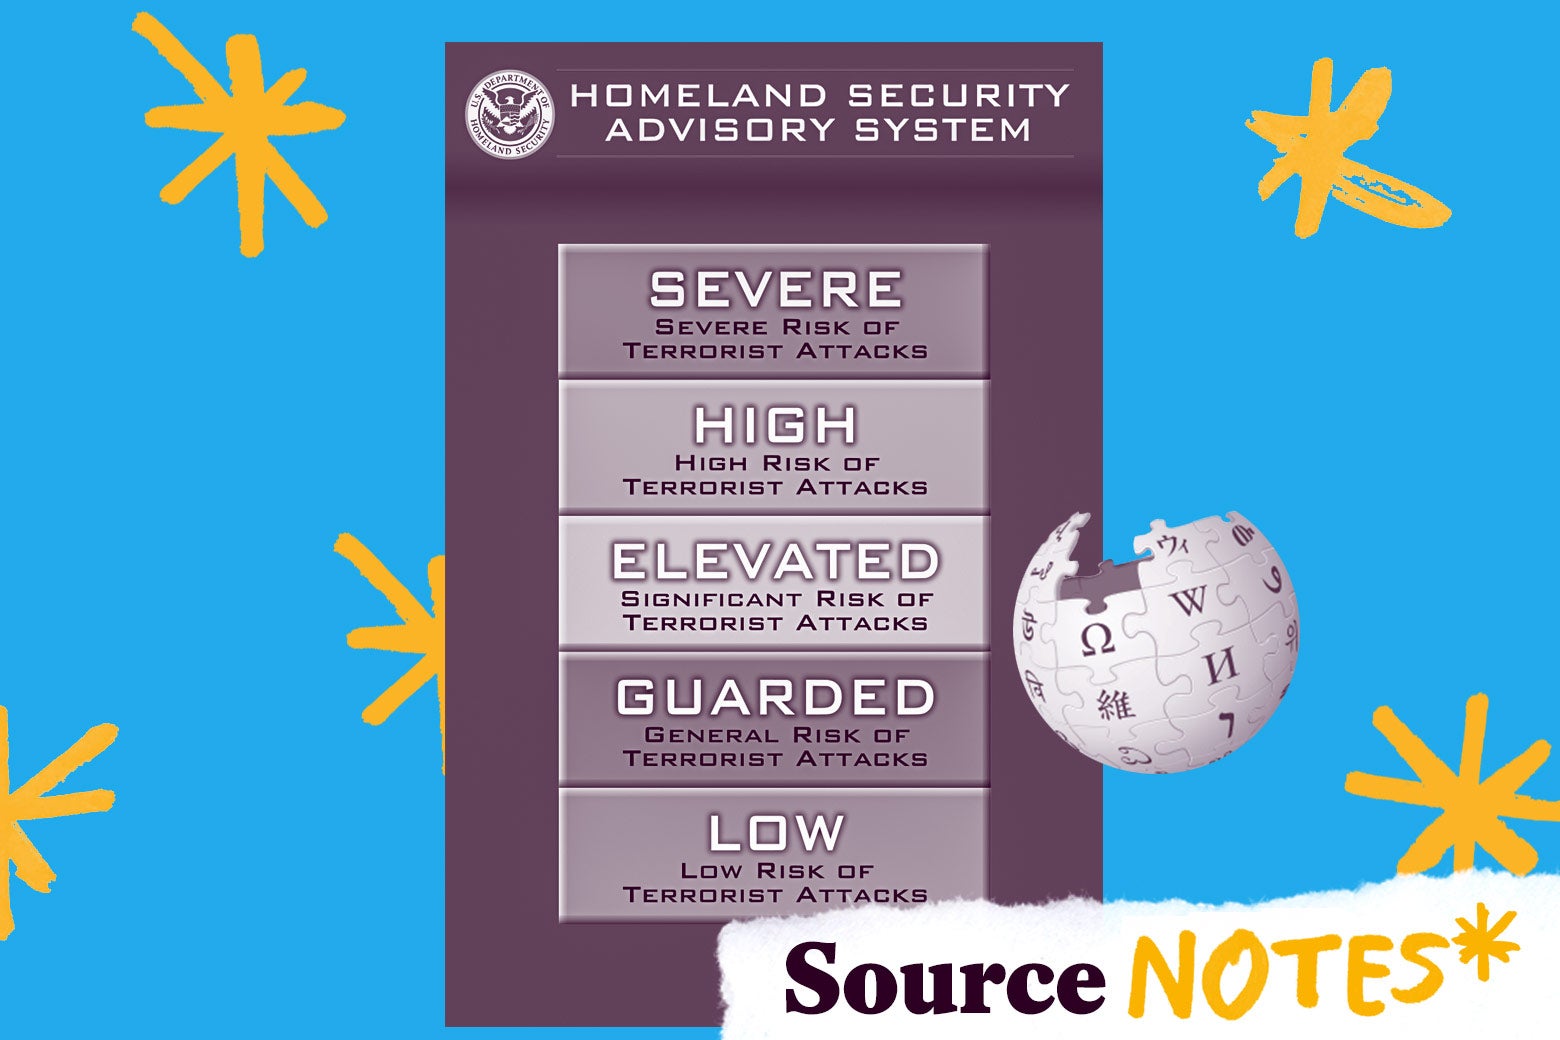 The Homeland Security System Advisory System, ranking alert levels from Low to Severe, next to the Wikipedia logo.